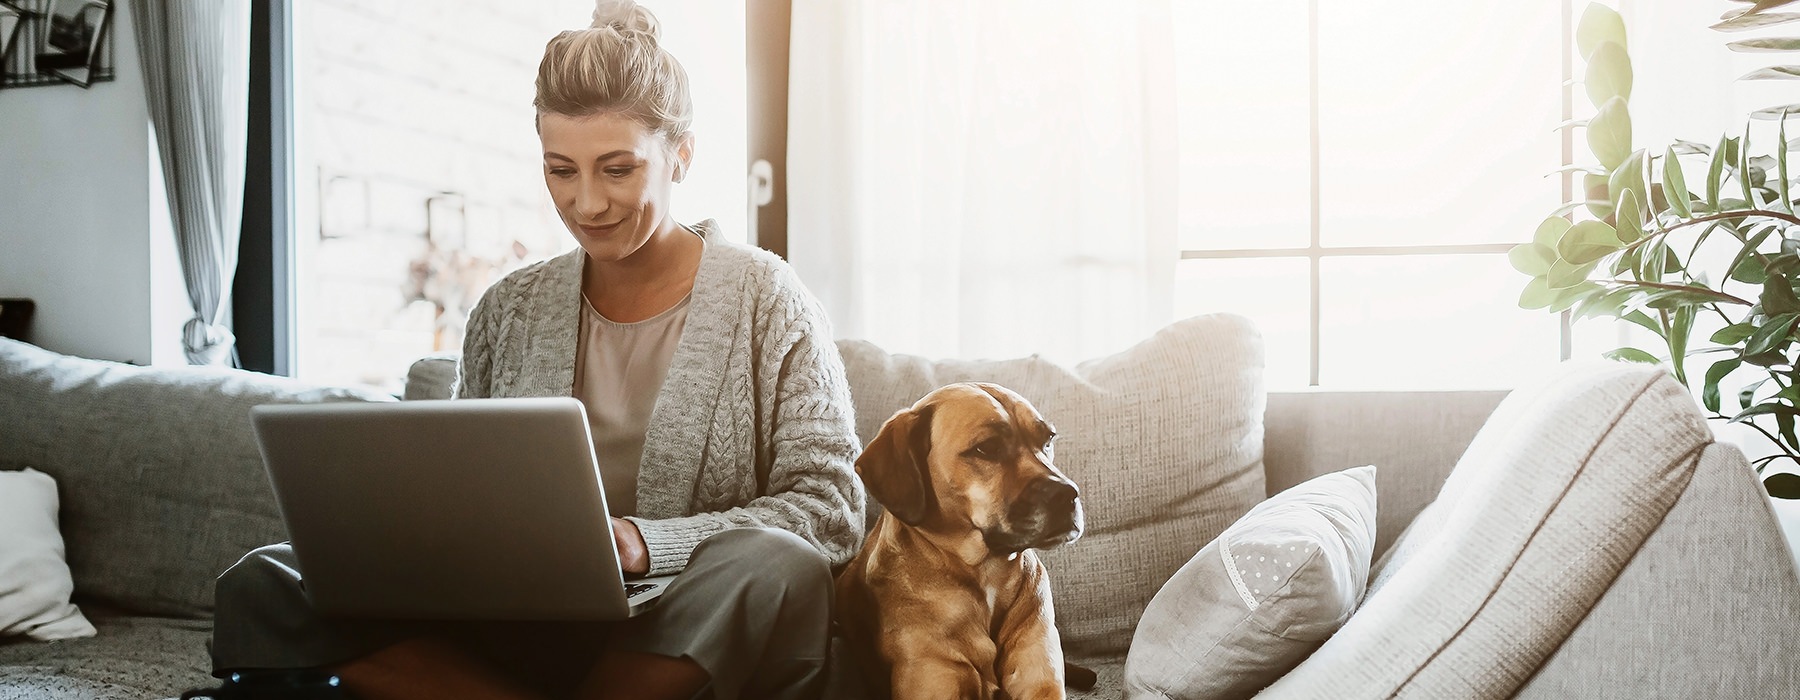 woman sitting with dog while on laptop